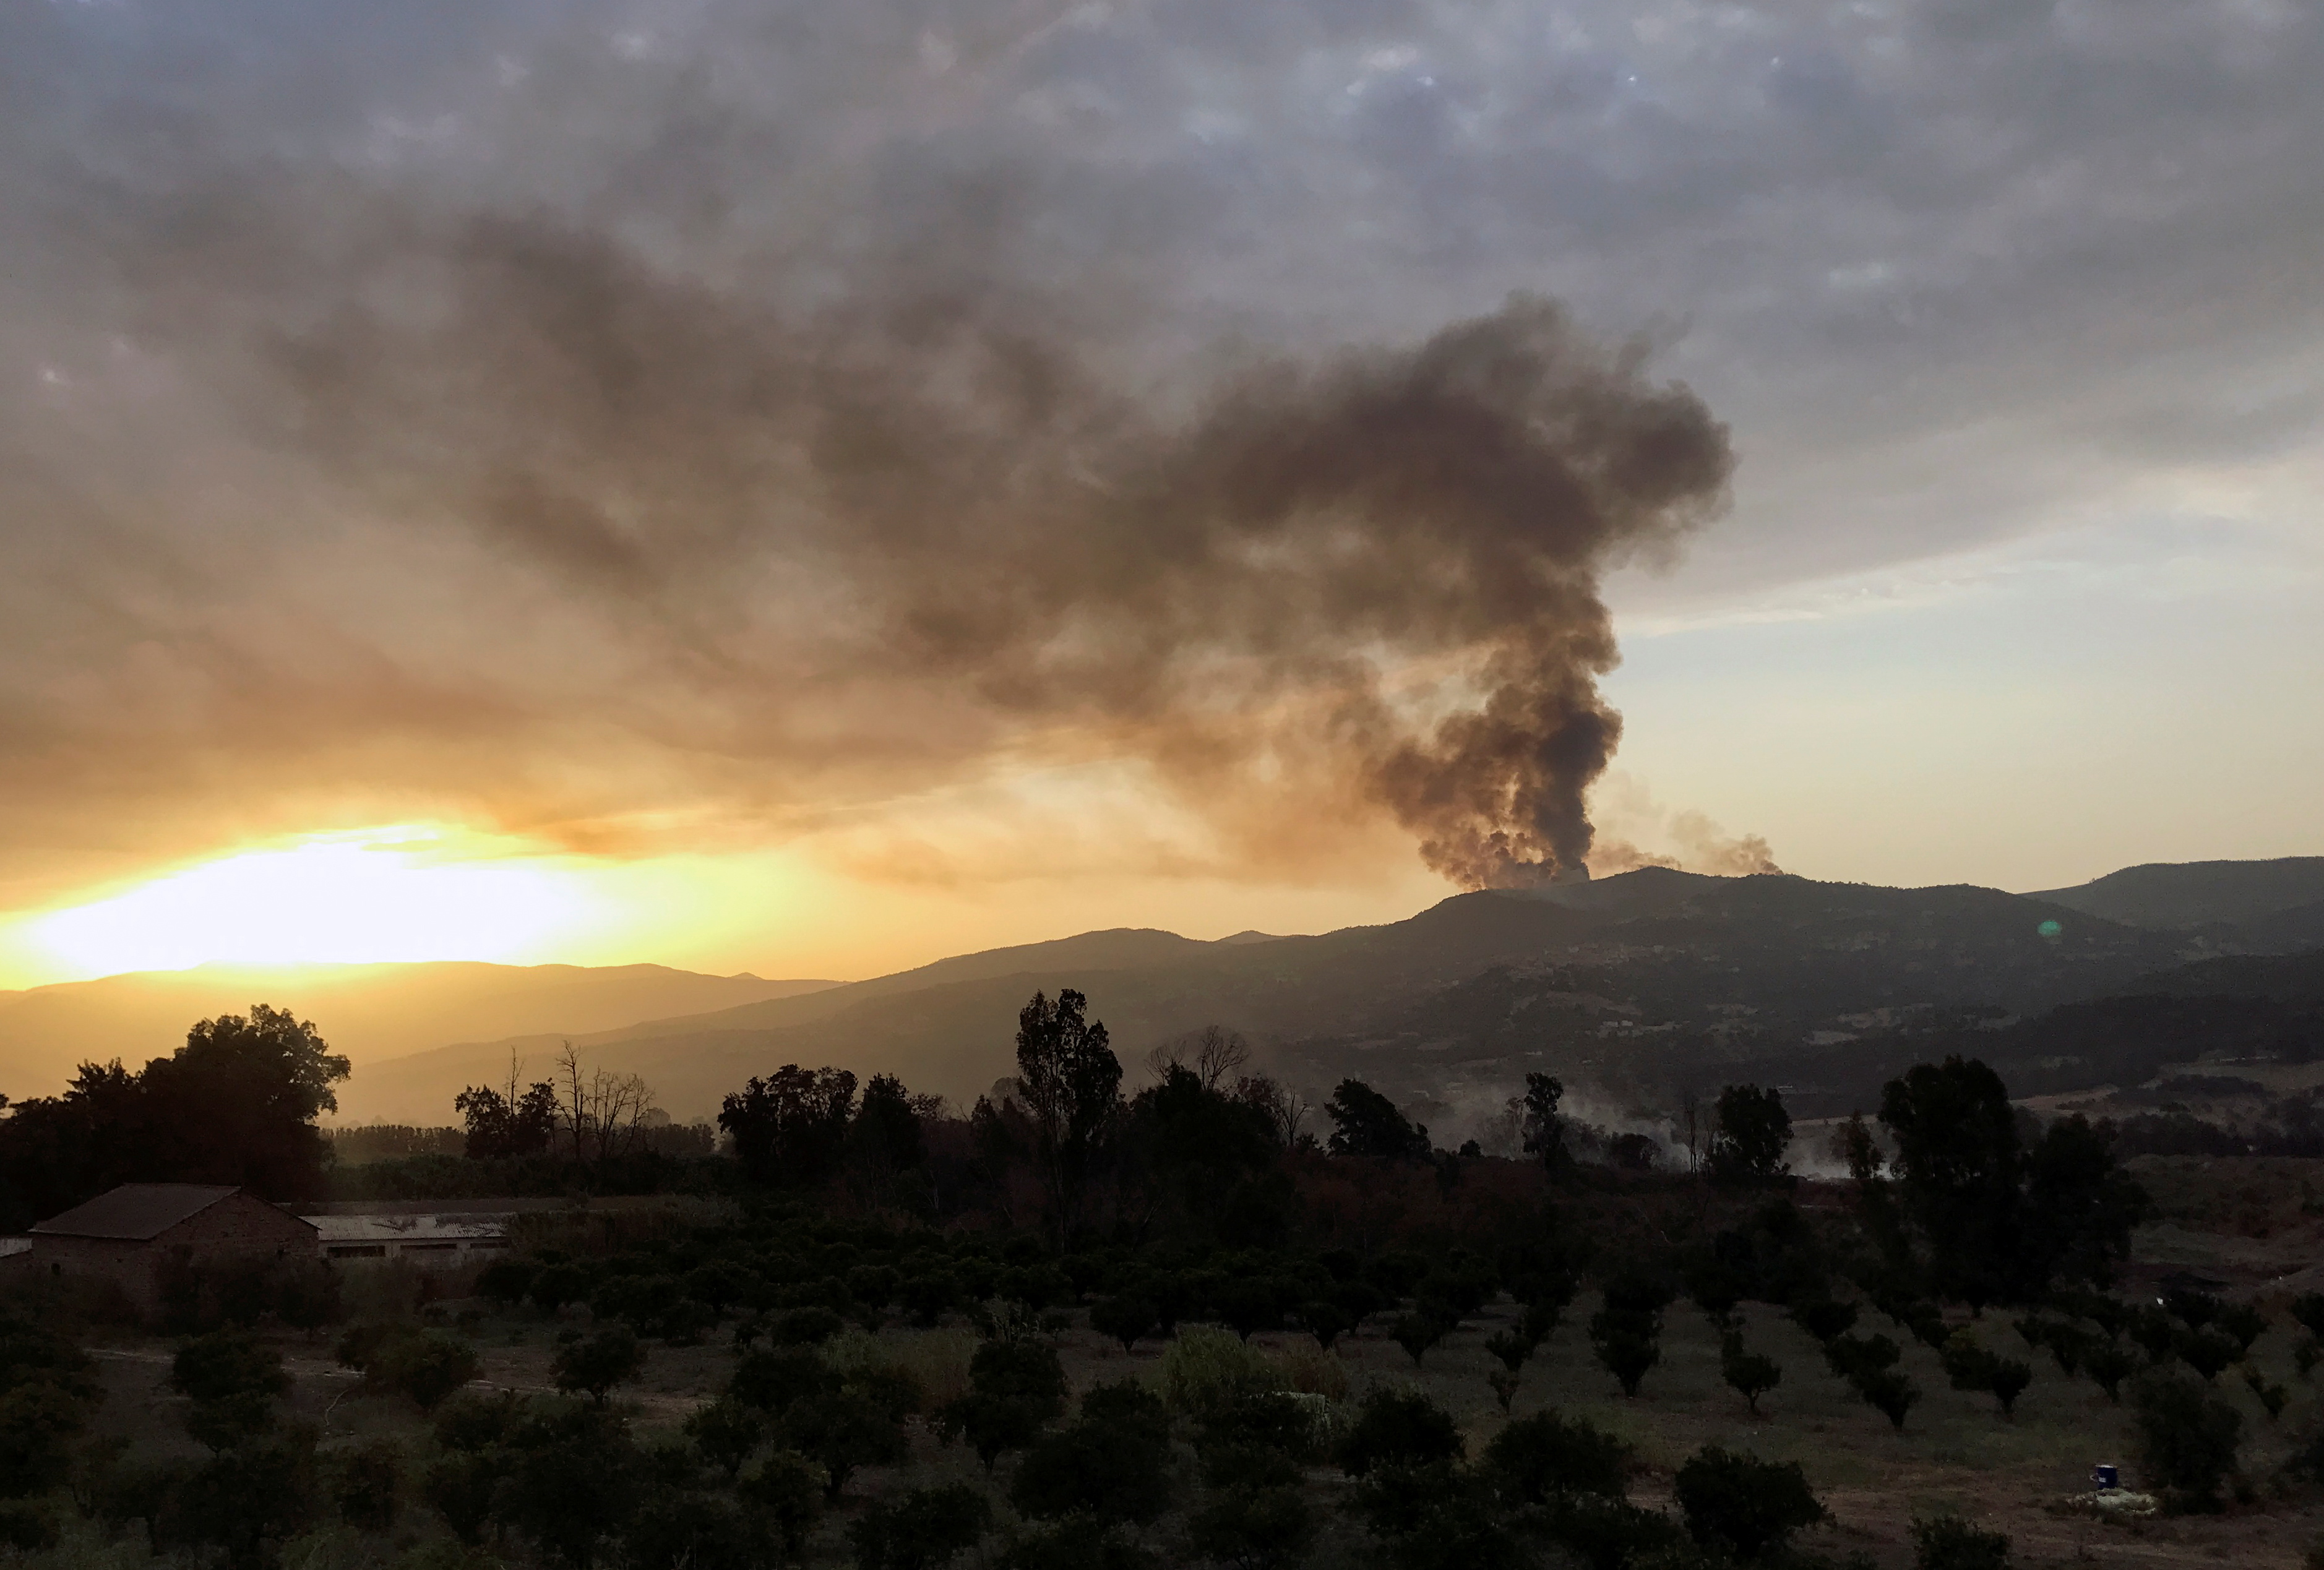 Smoke rises following a wildfire in Bejaia province